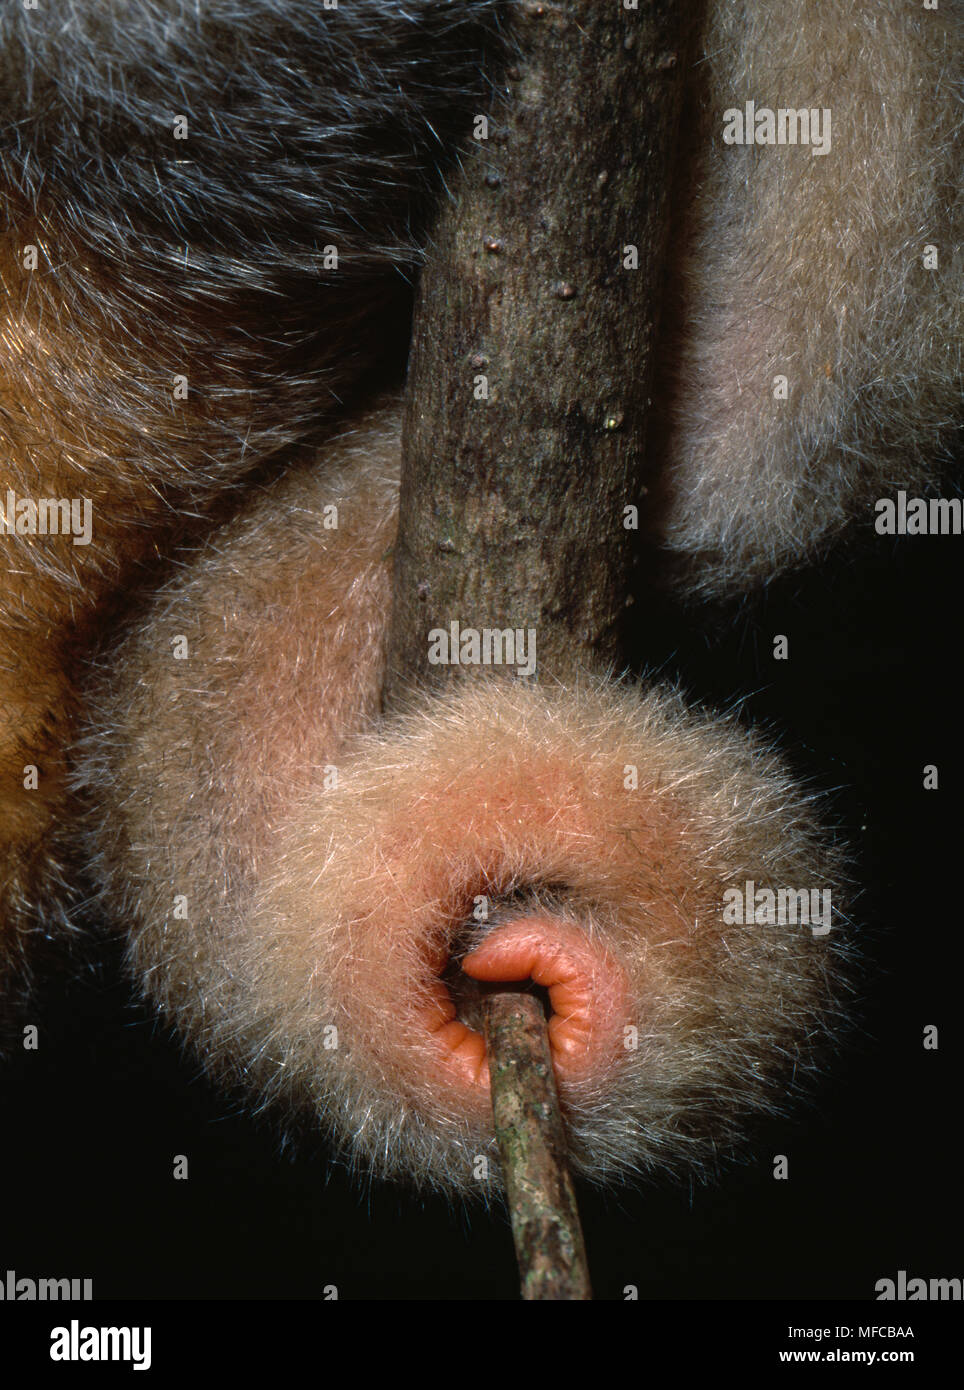 TWO-TOED or SILKY ANTEATER  Cyclopes didactylus  close-up of prehensile tail Caroni Swamp, Trinidad, West Indies Stock Photo